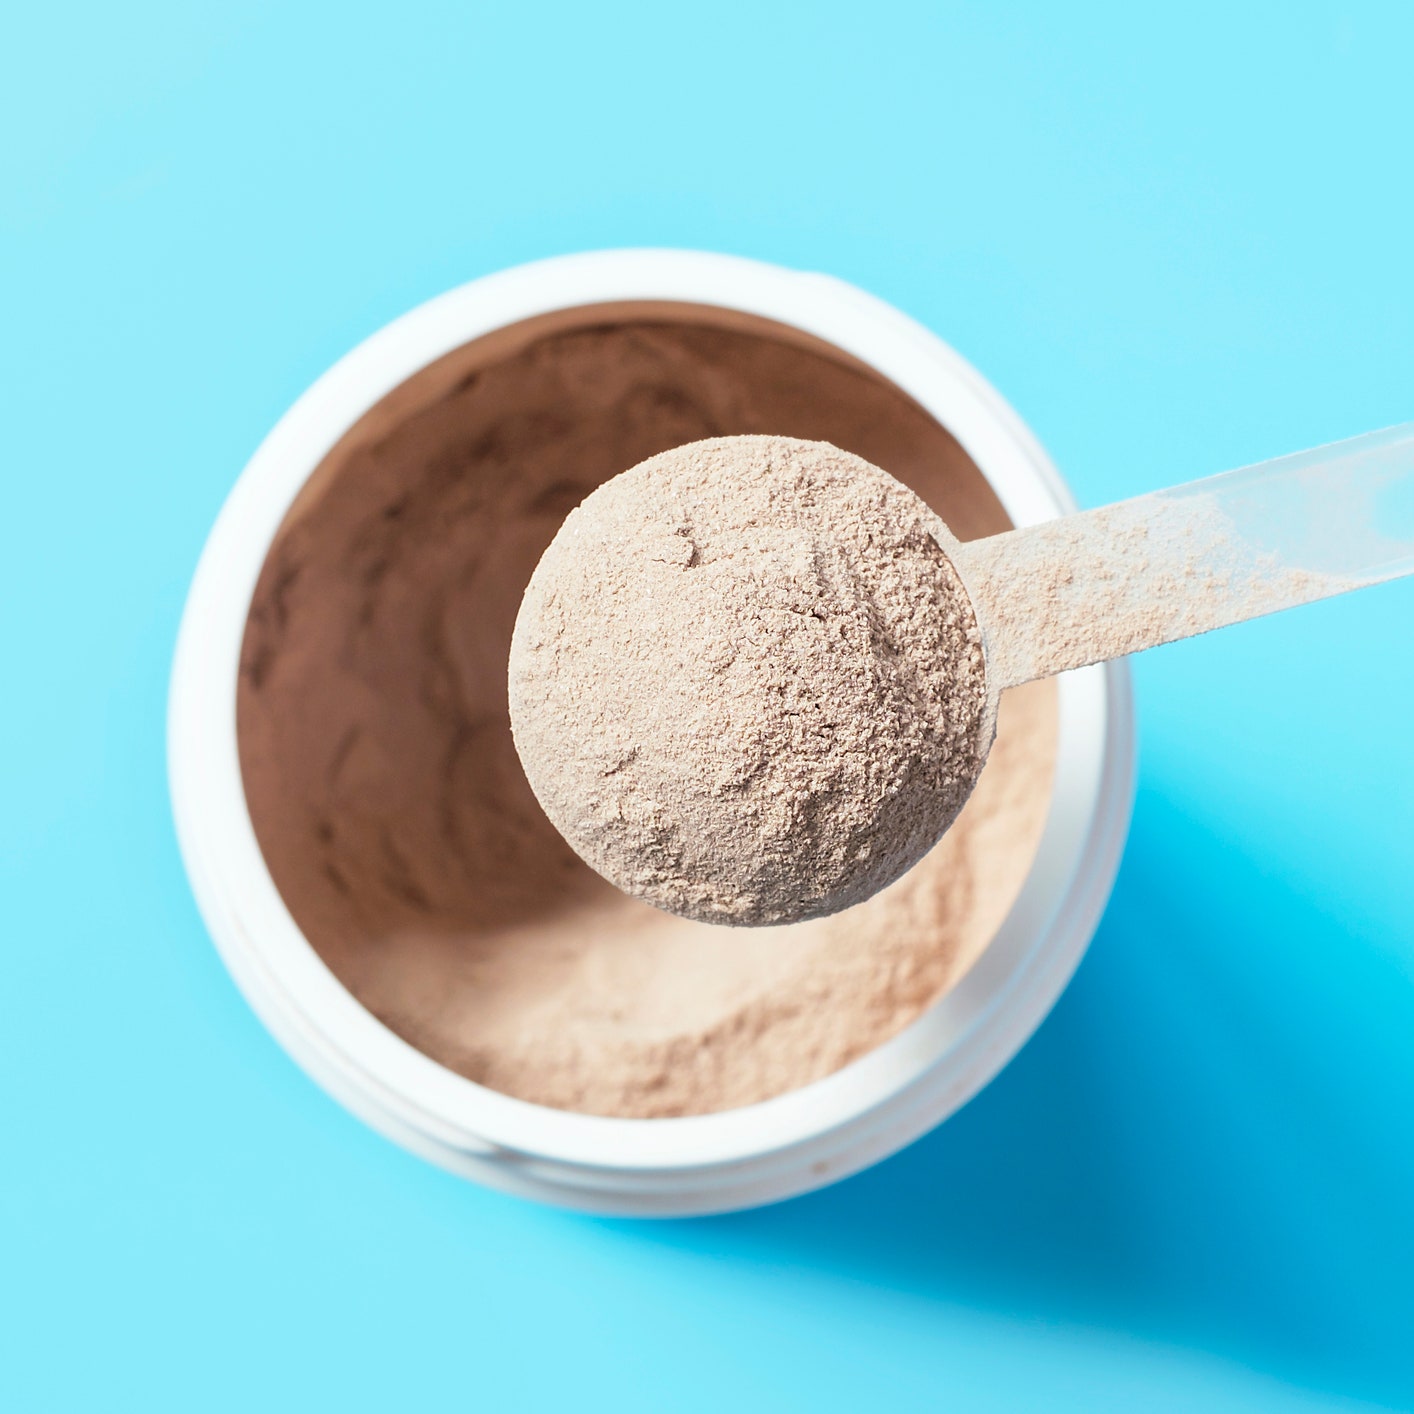 Some Vital Proteins Collagen Peptides Powder Has Been Recalled&-Here’s What to Know